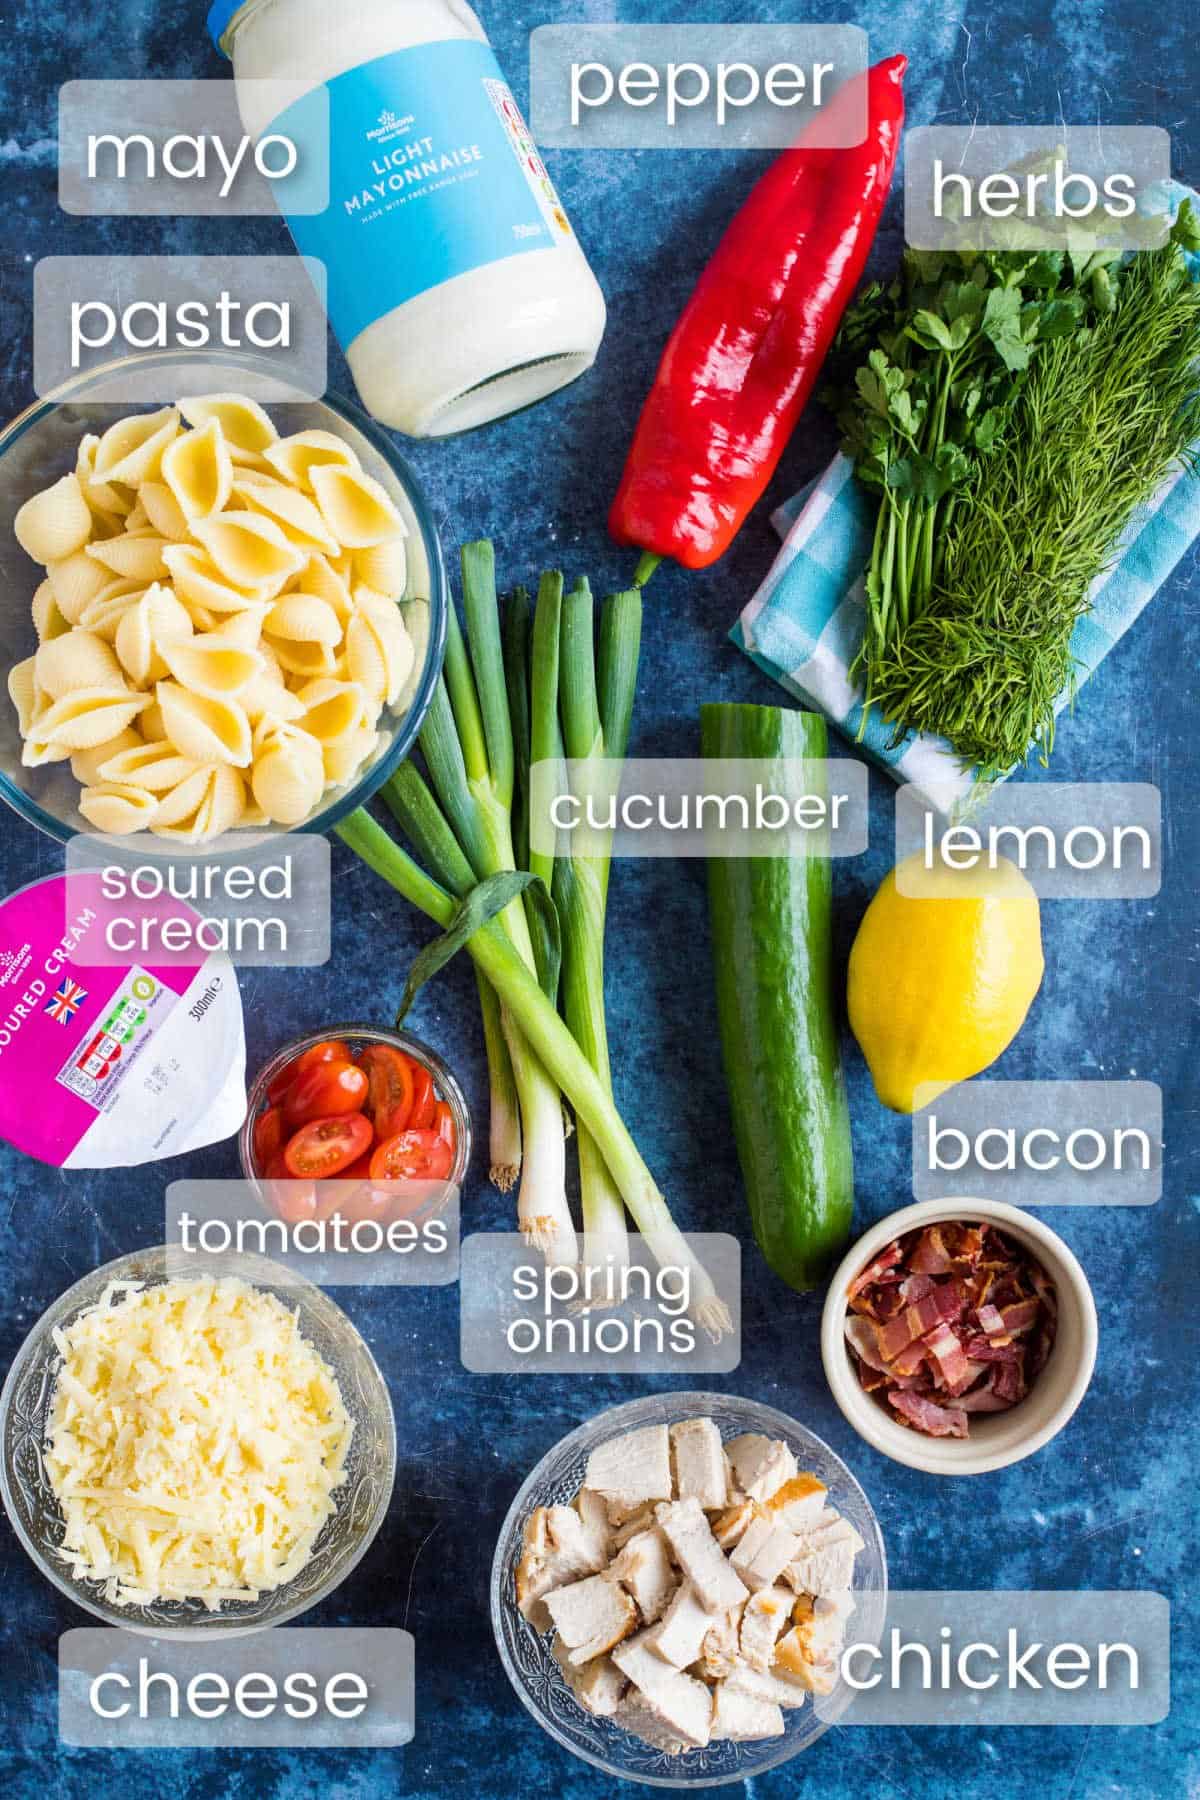 Ingredients to make chicken and bacon pasta salad.